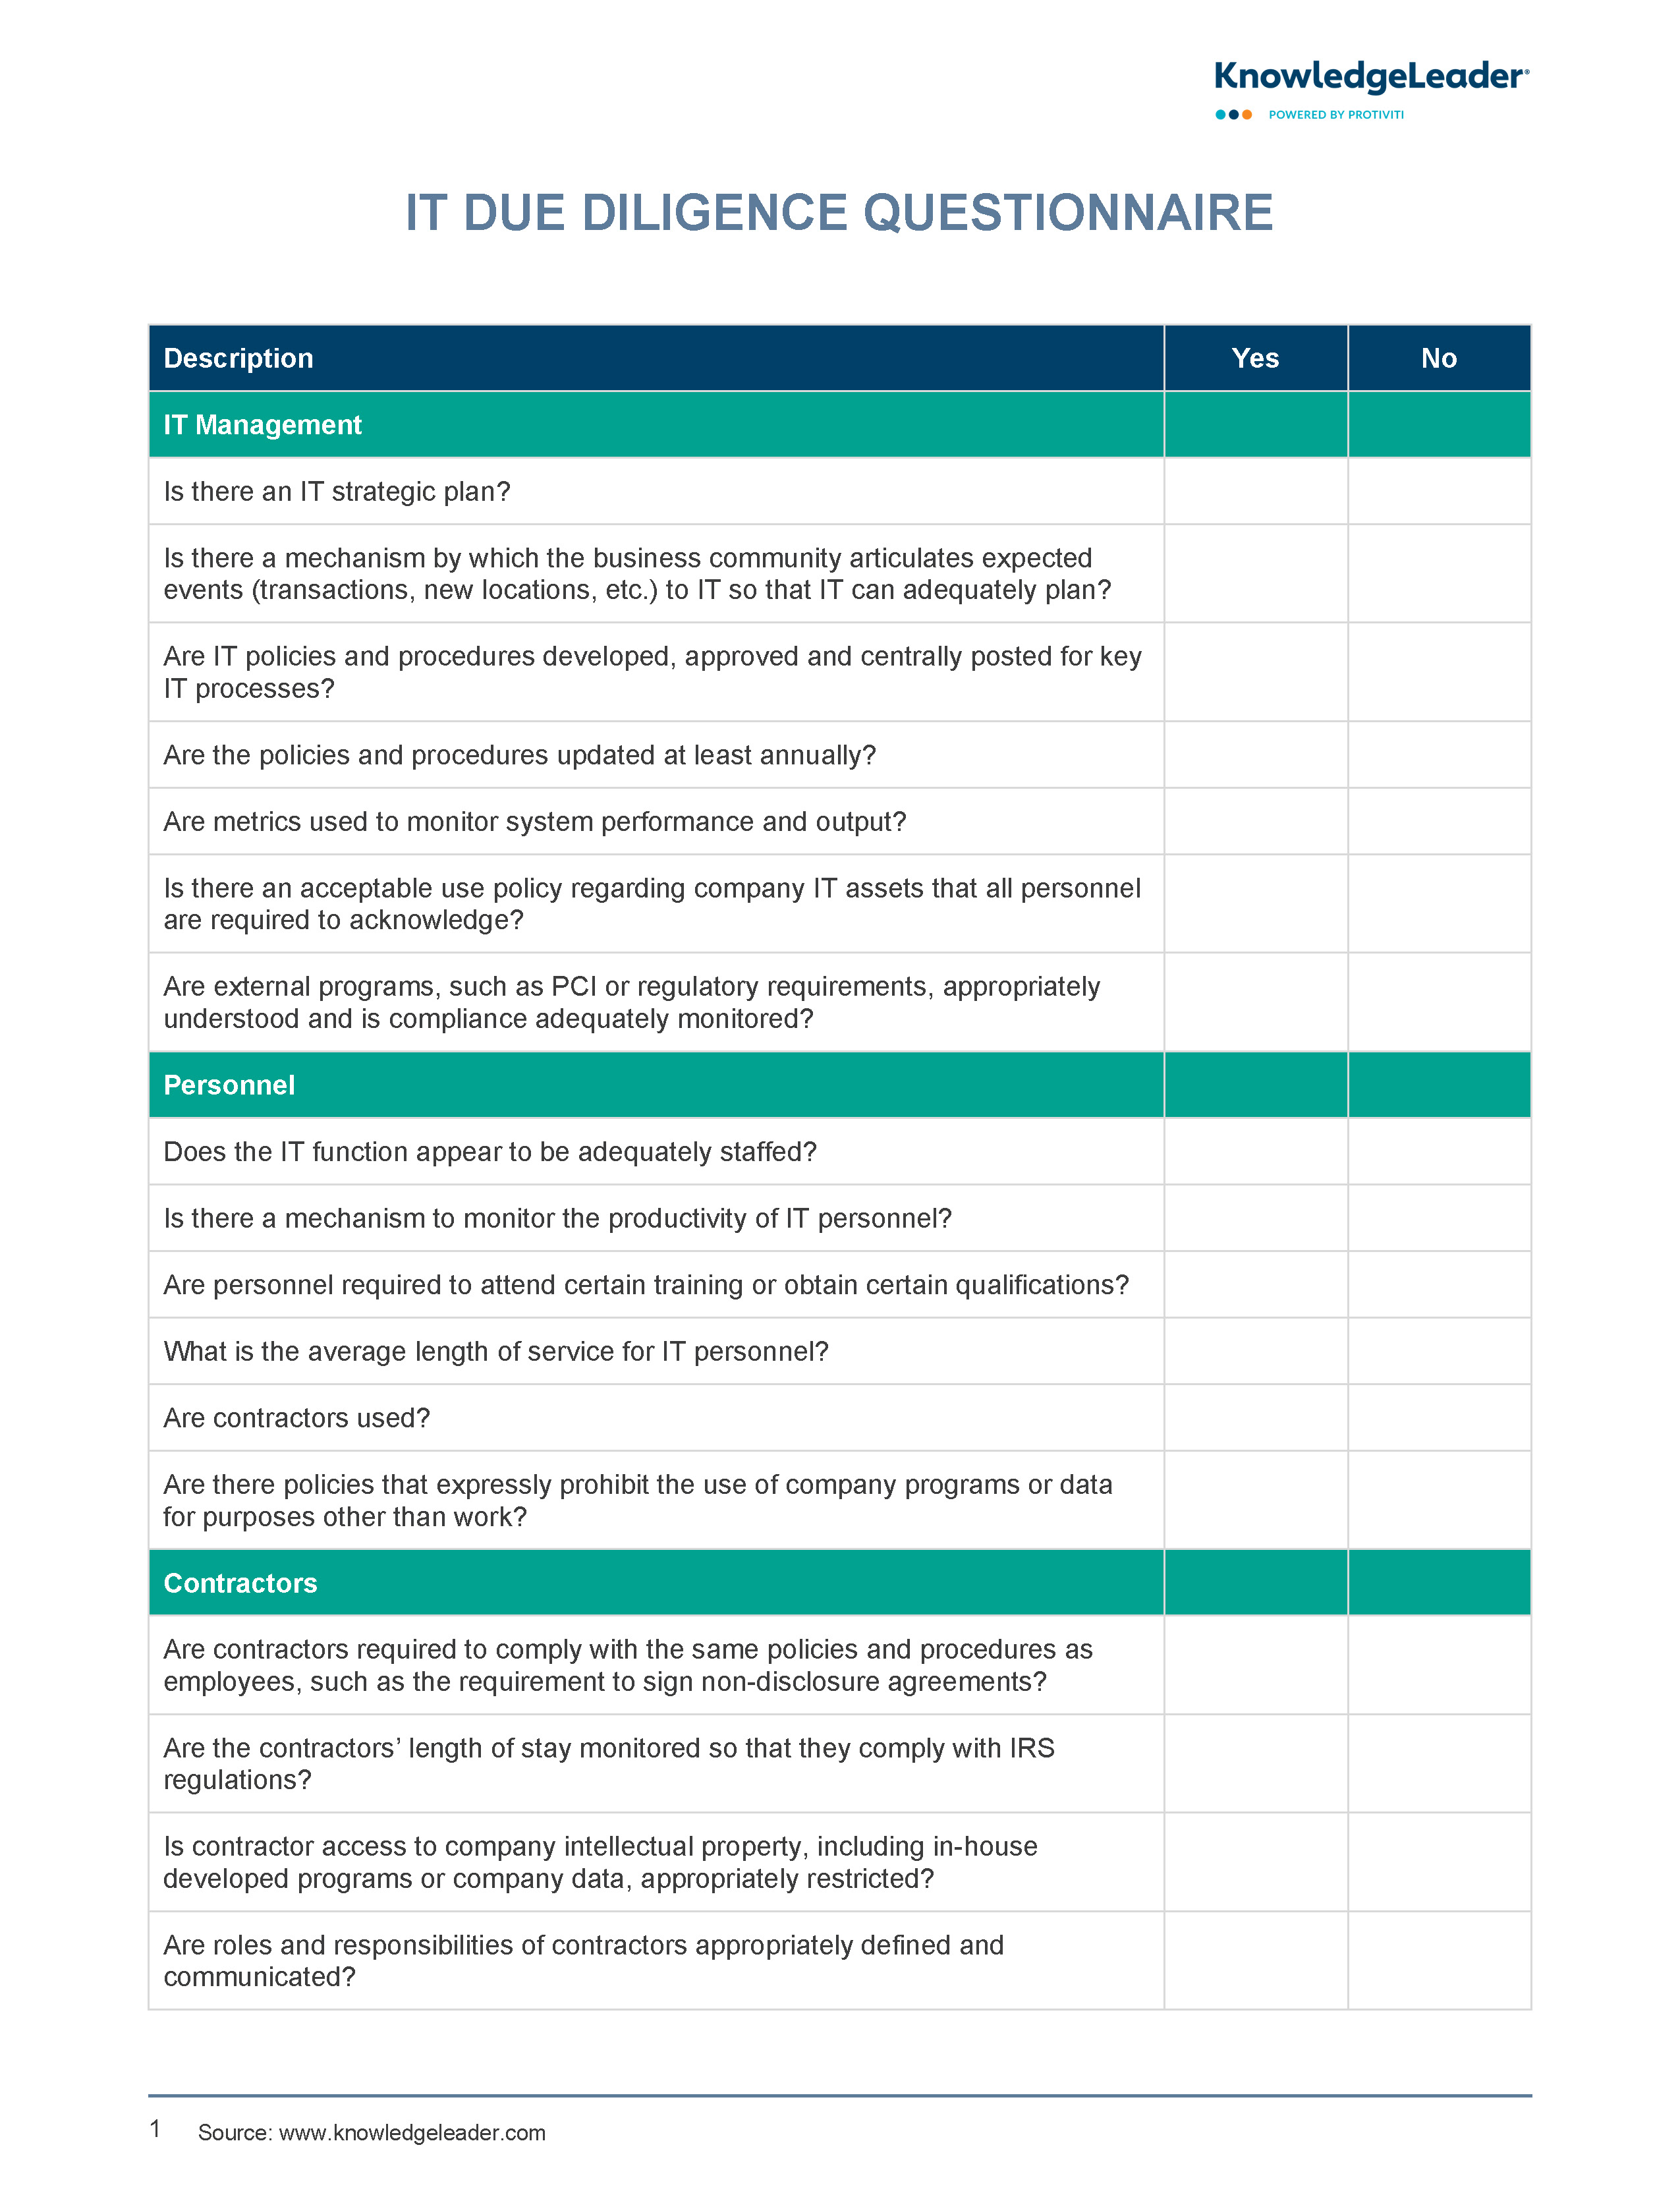 Screenshot of the first page of IT Due Diligence Questionnaire